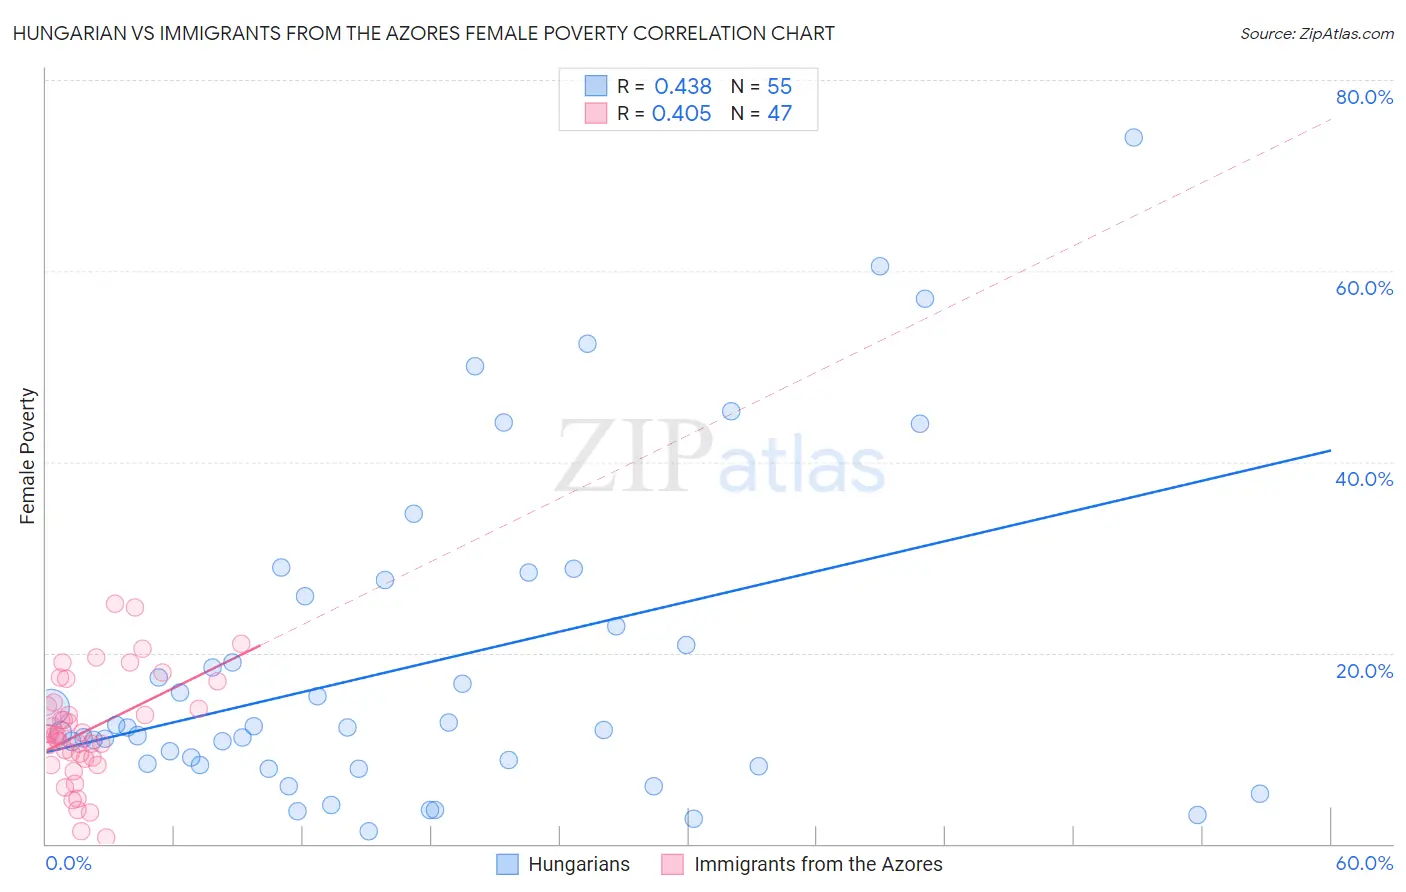 Hungarian vs Immigrants from the Azores Female Poverty